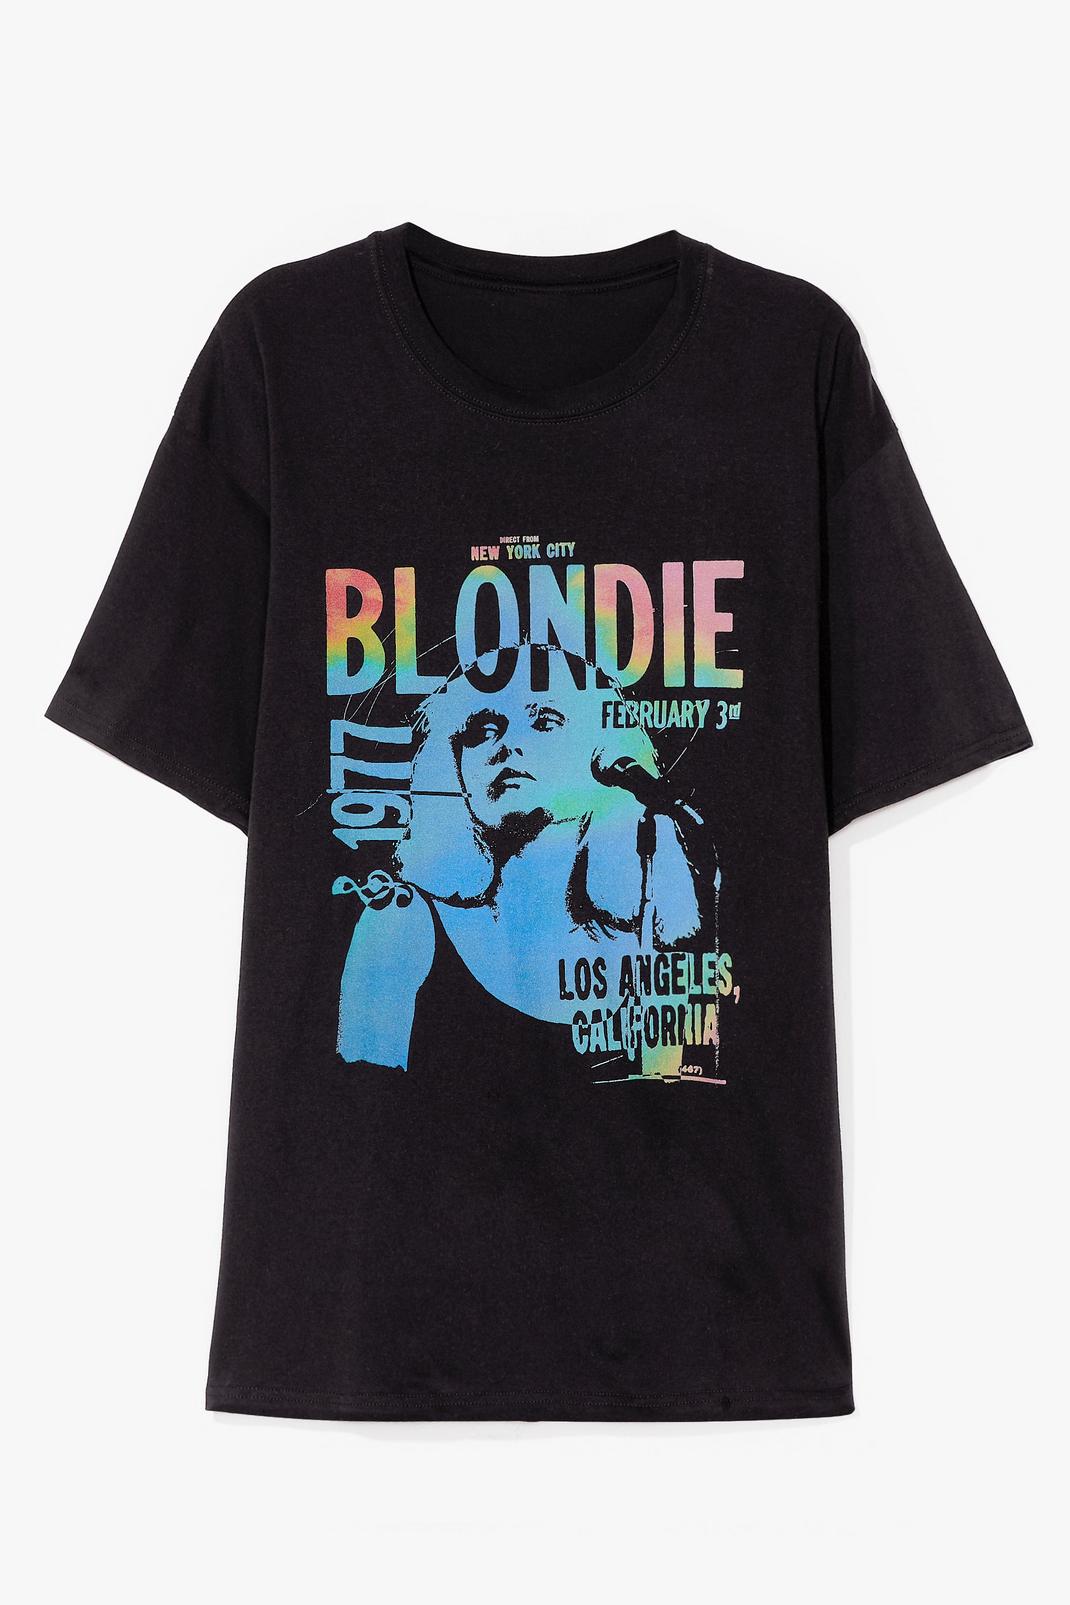 Black Blondie 1977 Graphic Band T-Shirt image number 1